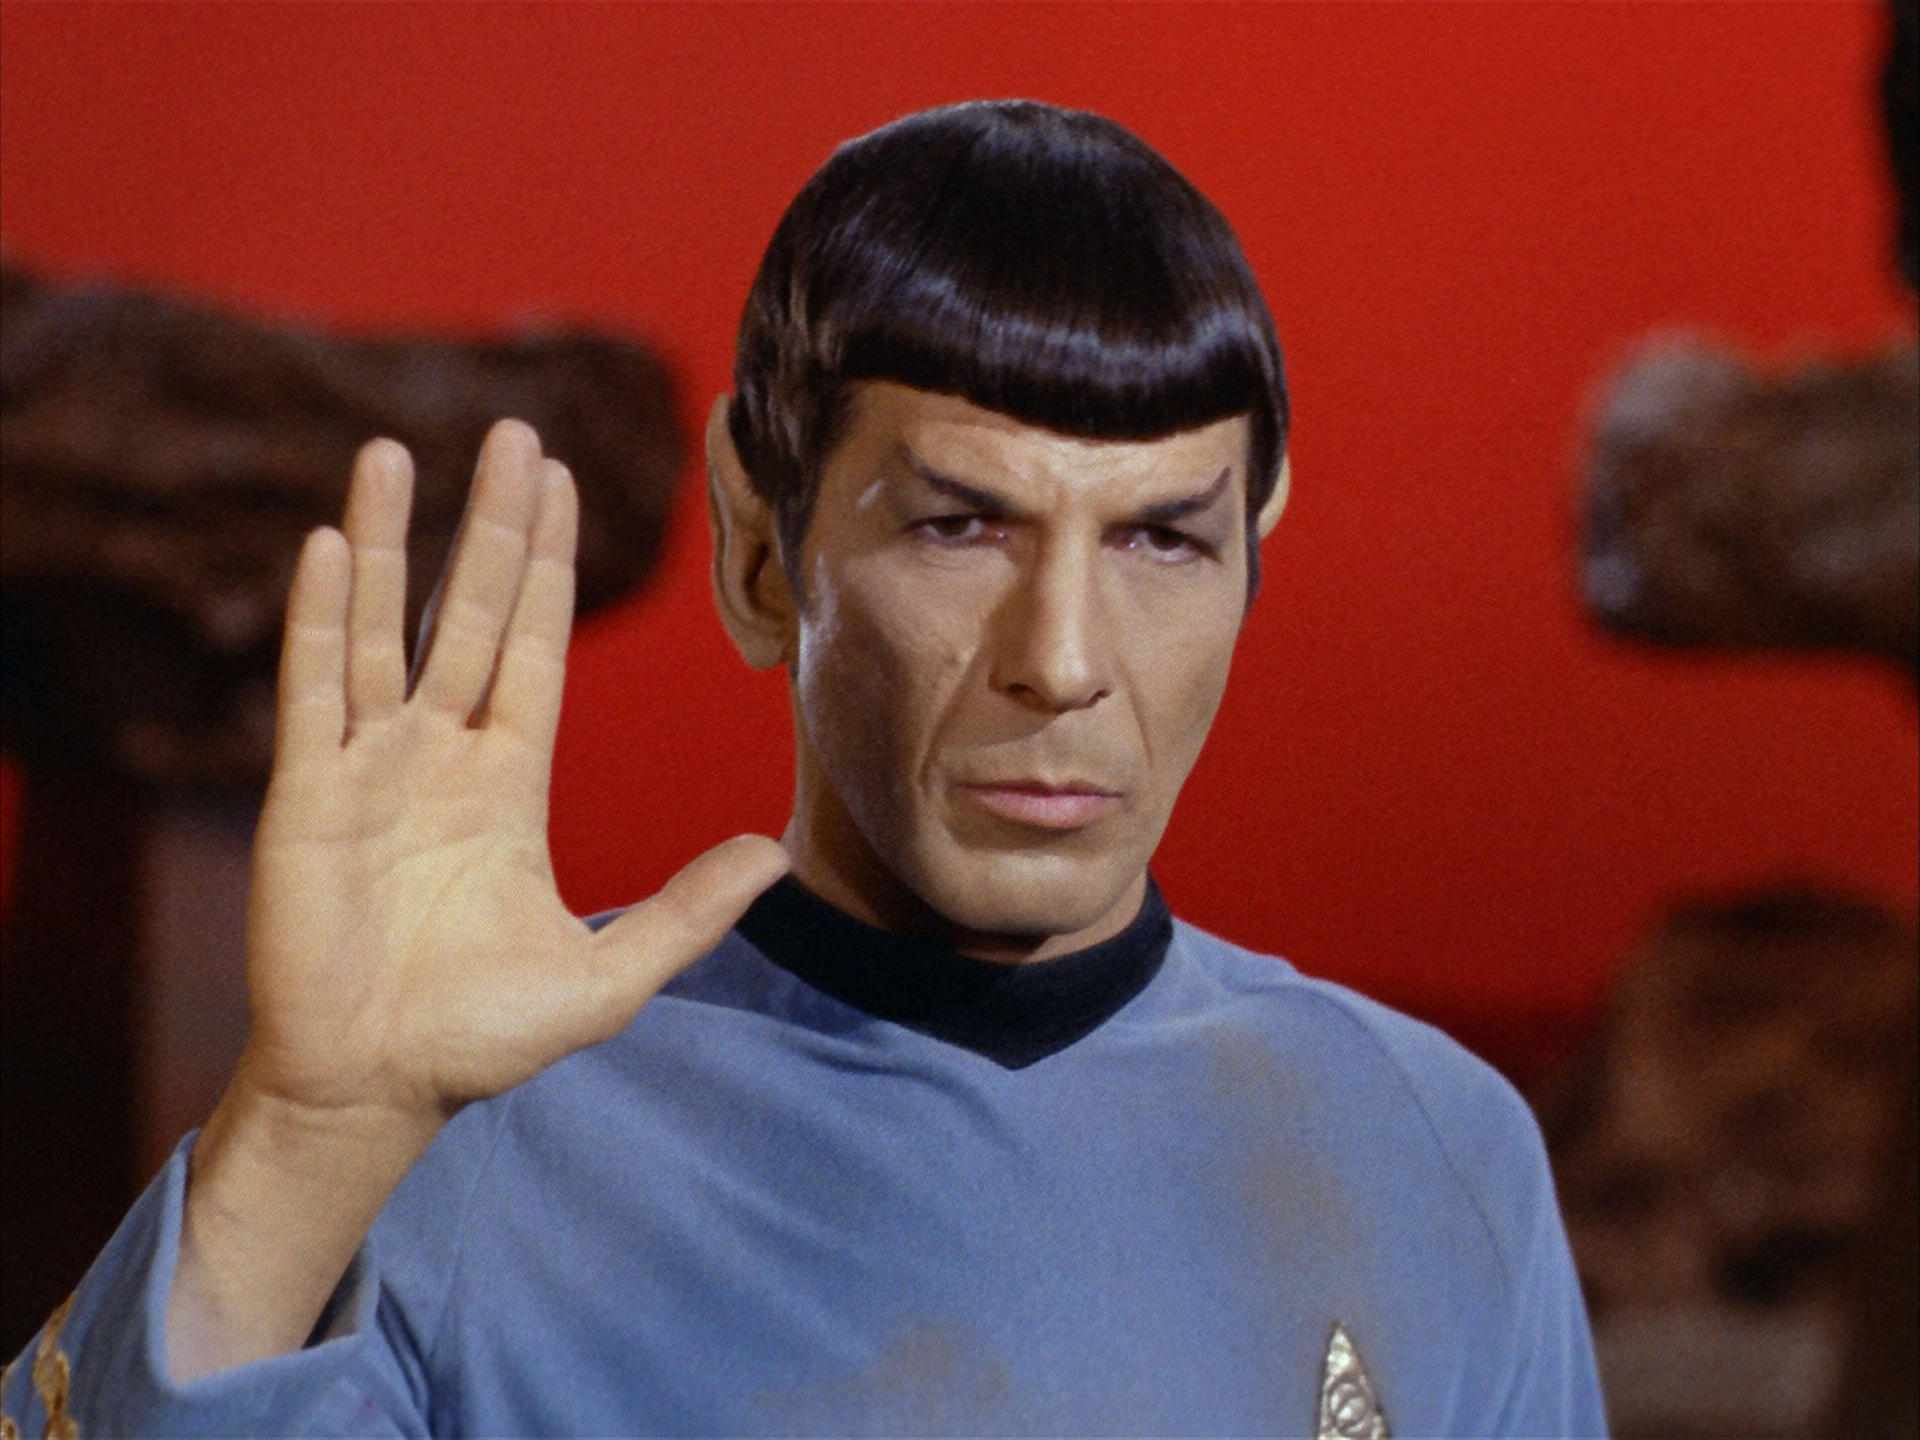 Nimoy lived long and prospered.